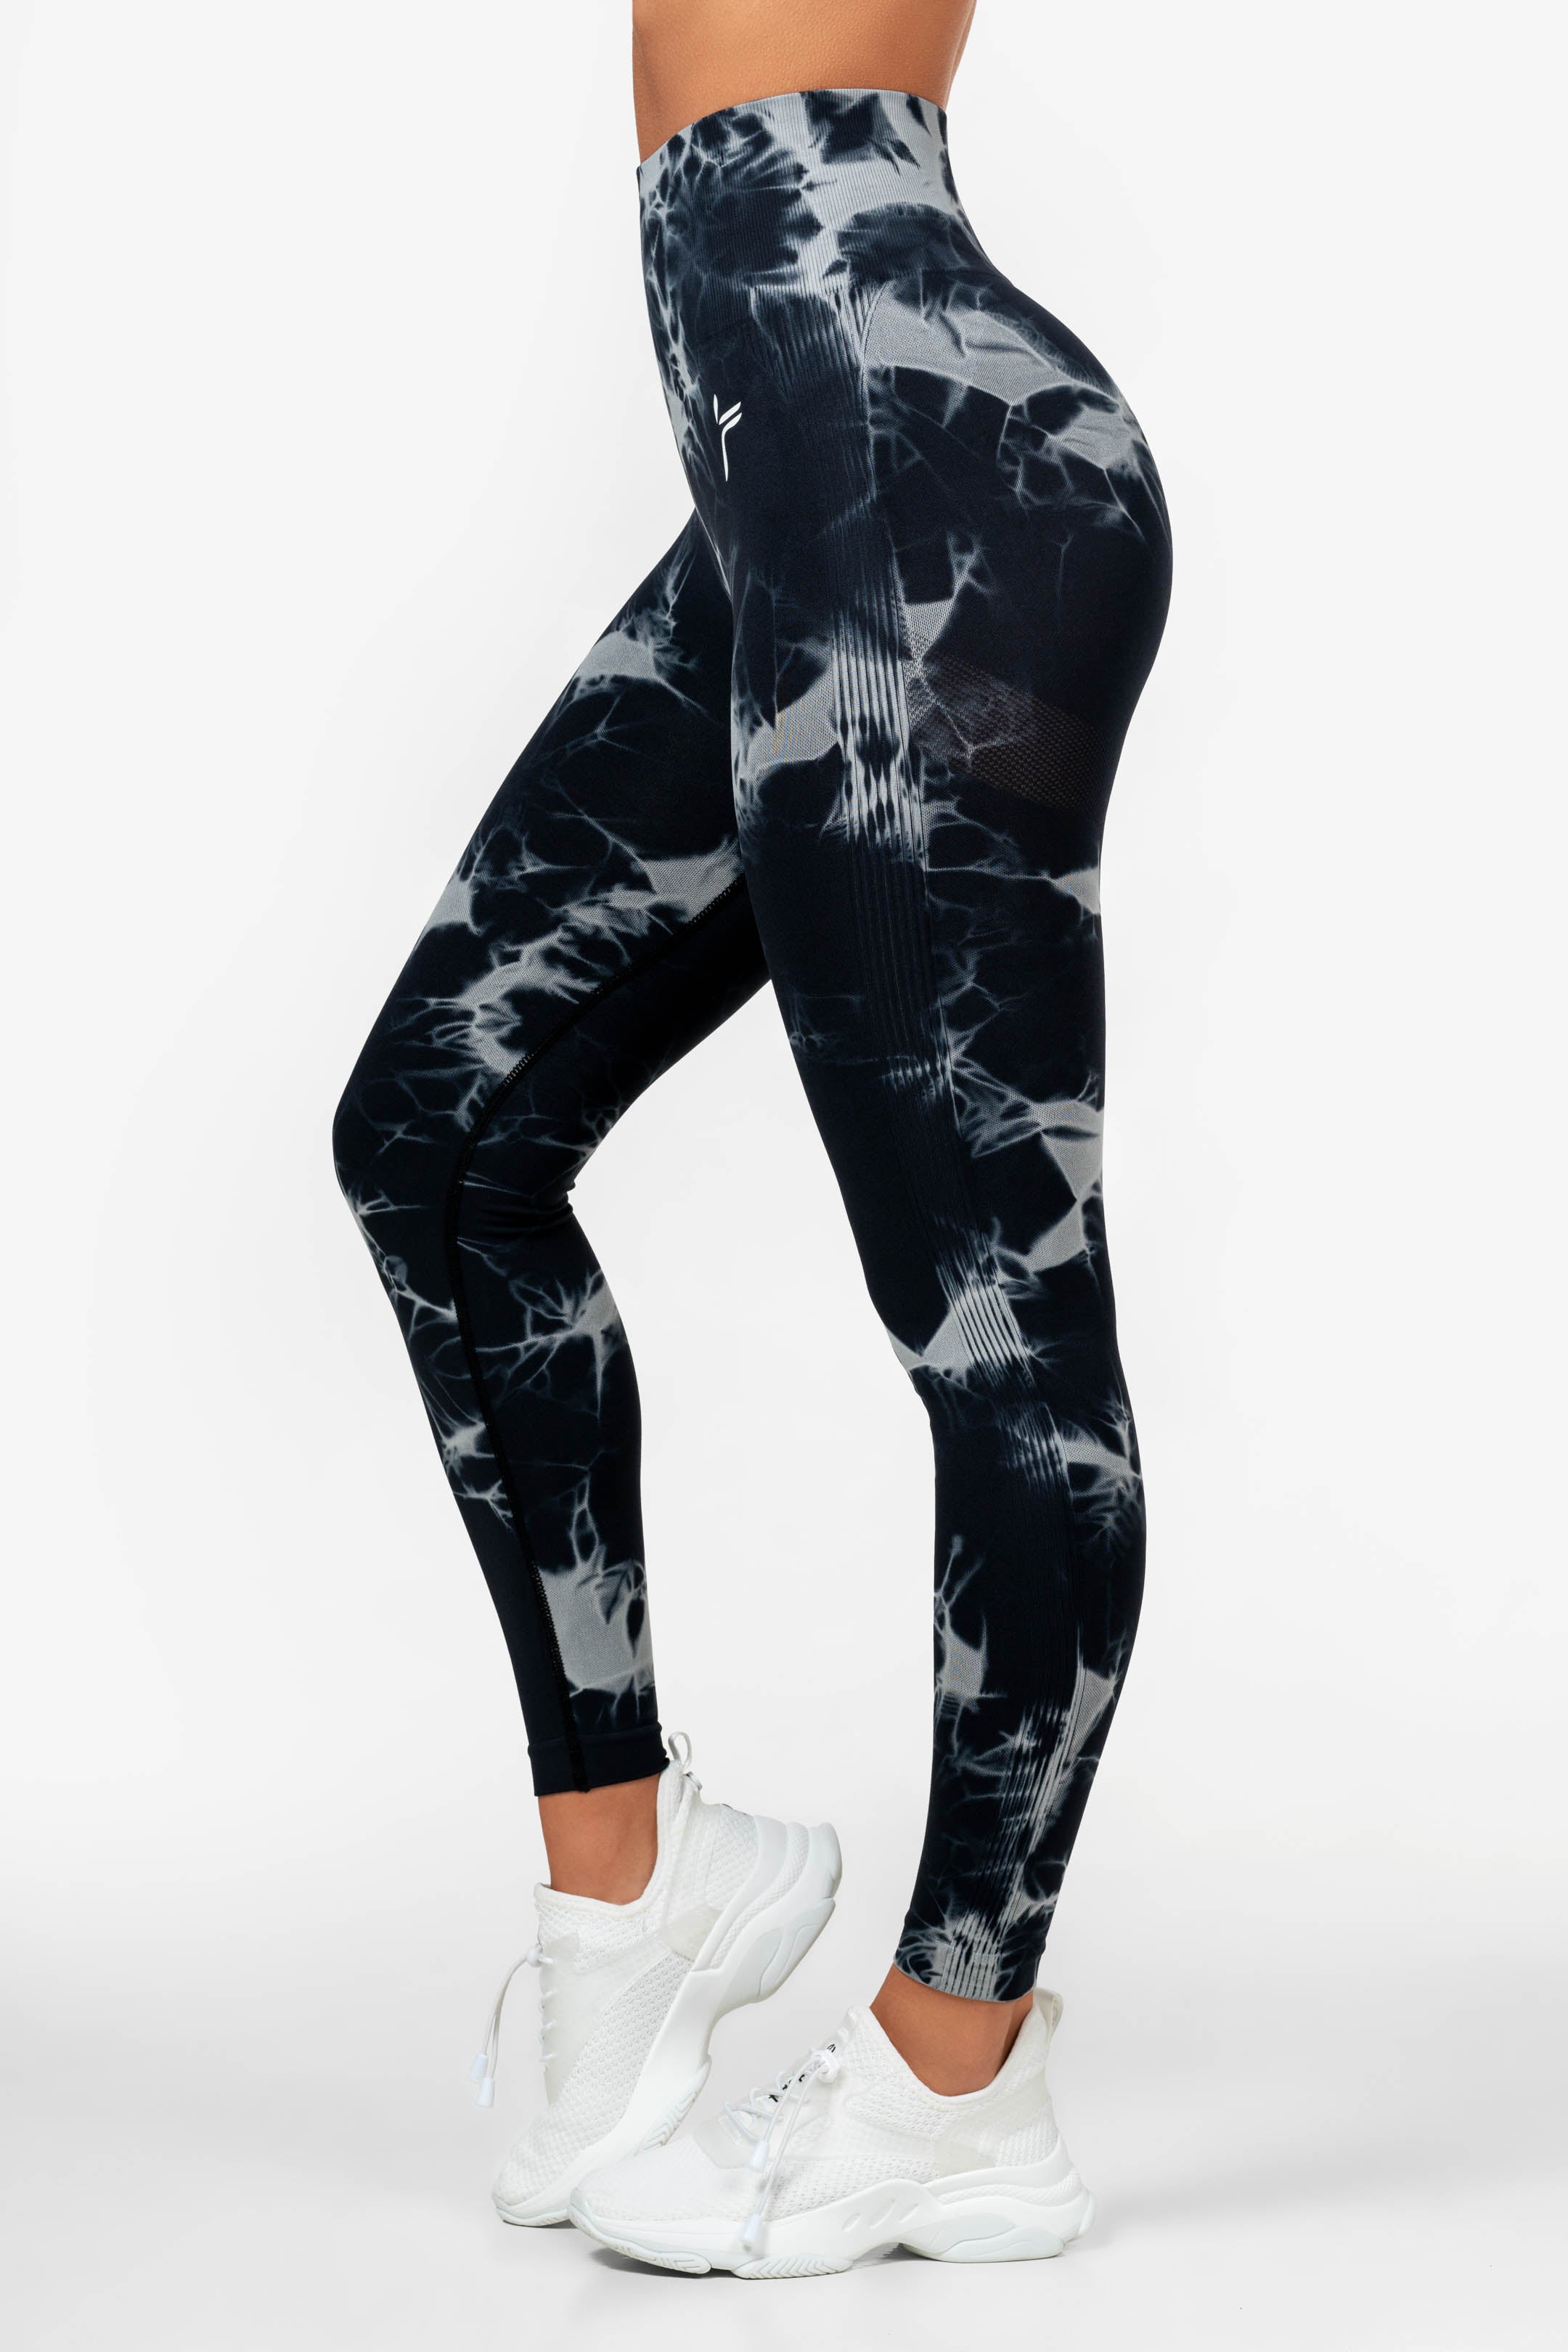 Tie Dye Seamless Yoga Go Colours Leggings Price With Scrunch Butt